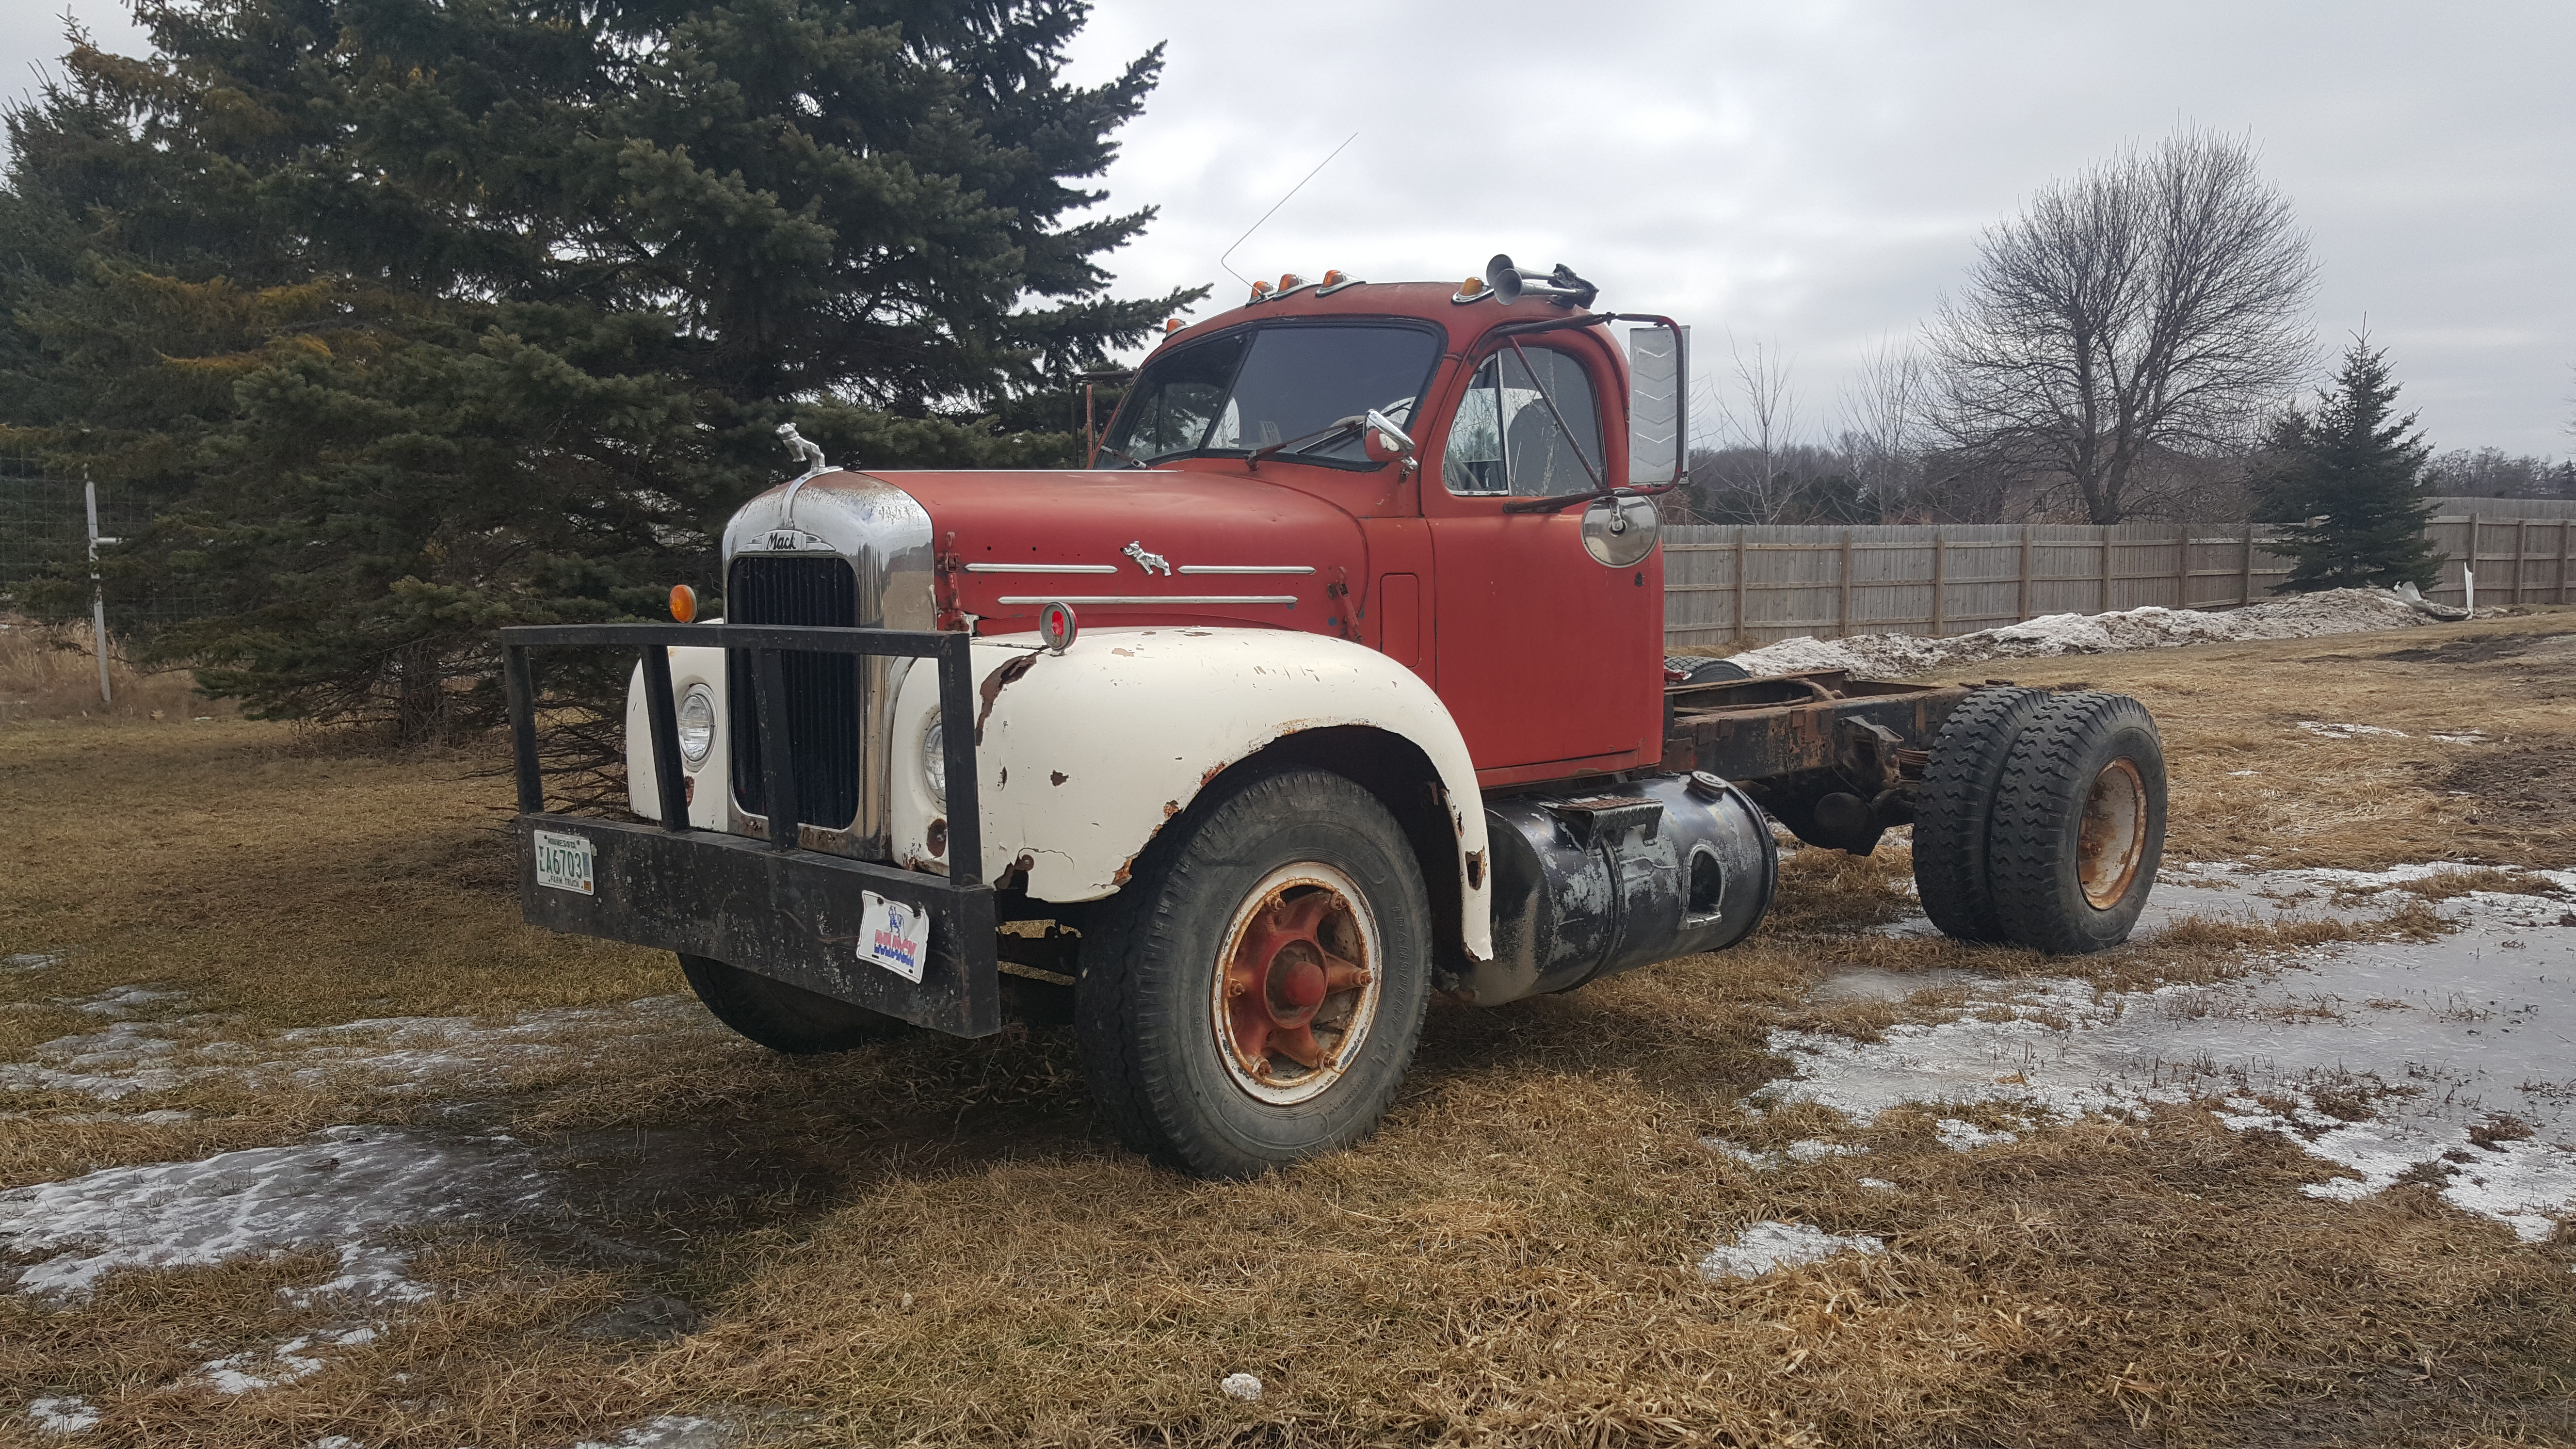 1959 mack b61 for sale $8000.00, trying to sell before I move